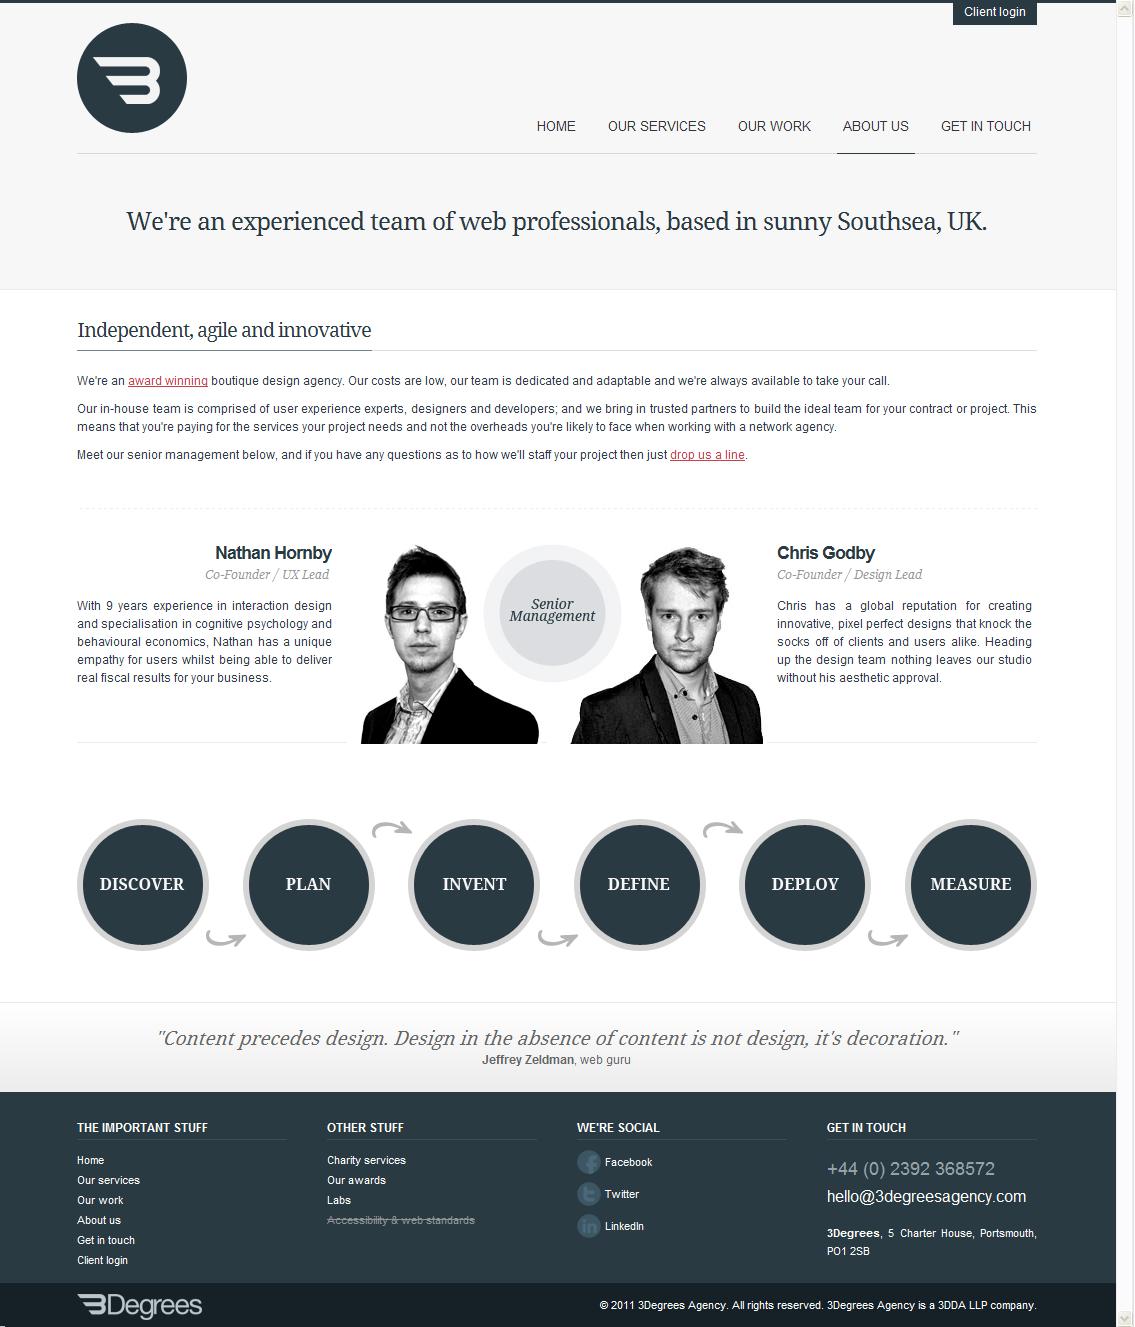 3Degrees Design Agency - About us.jpg